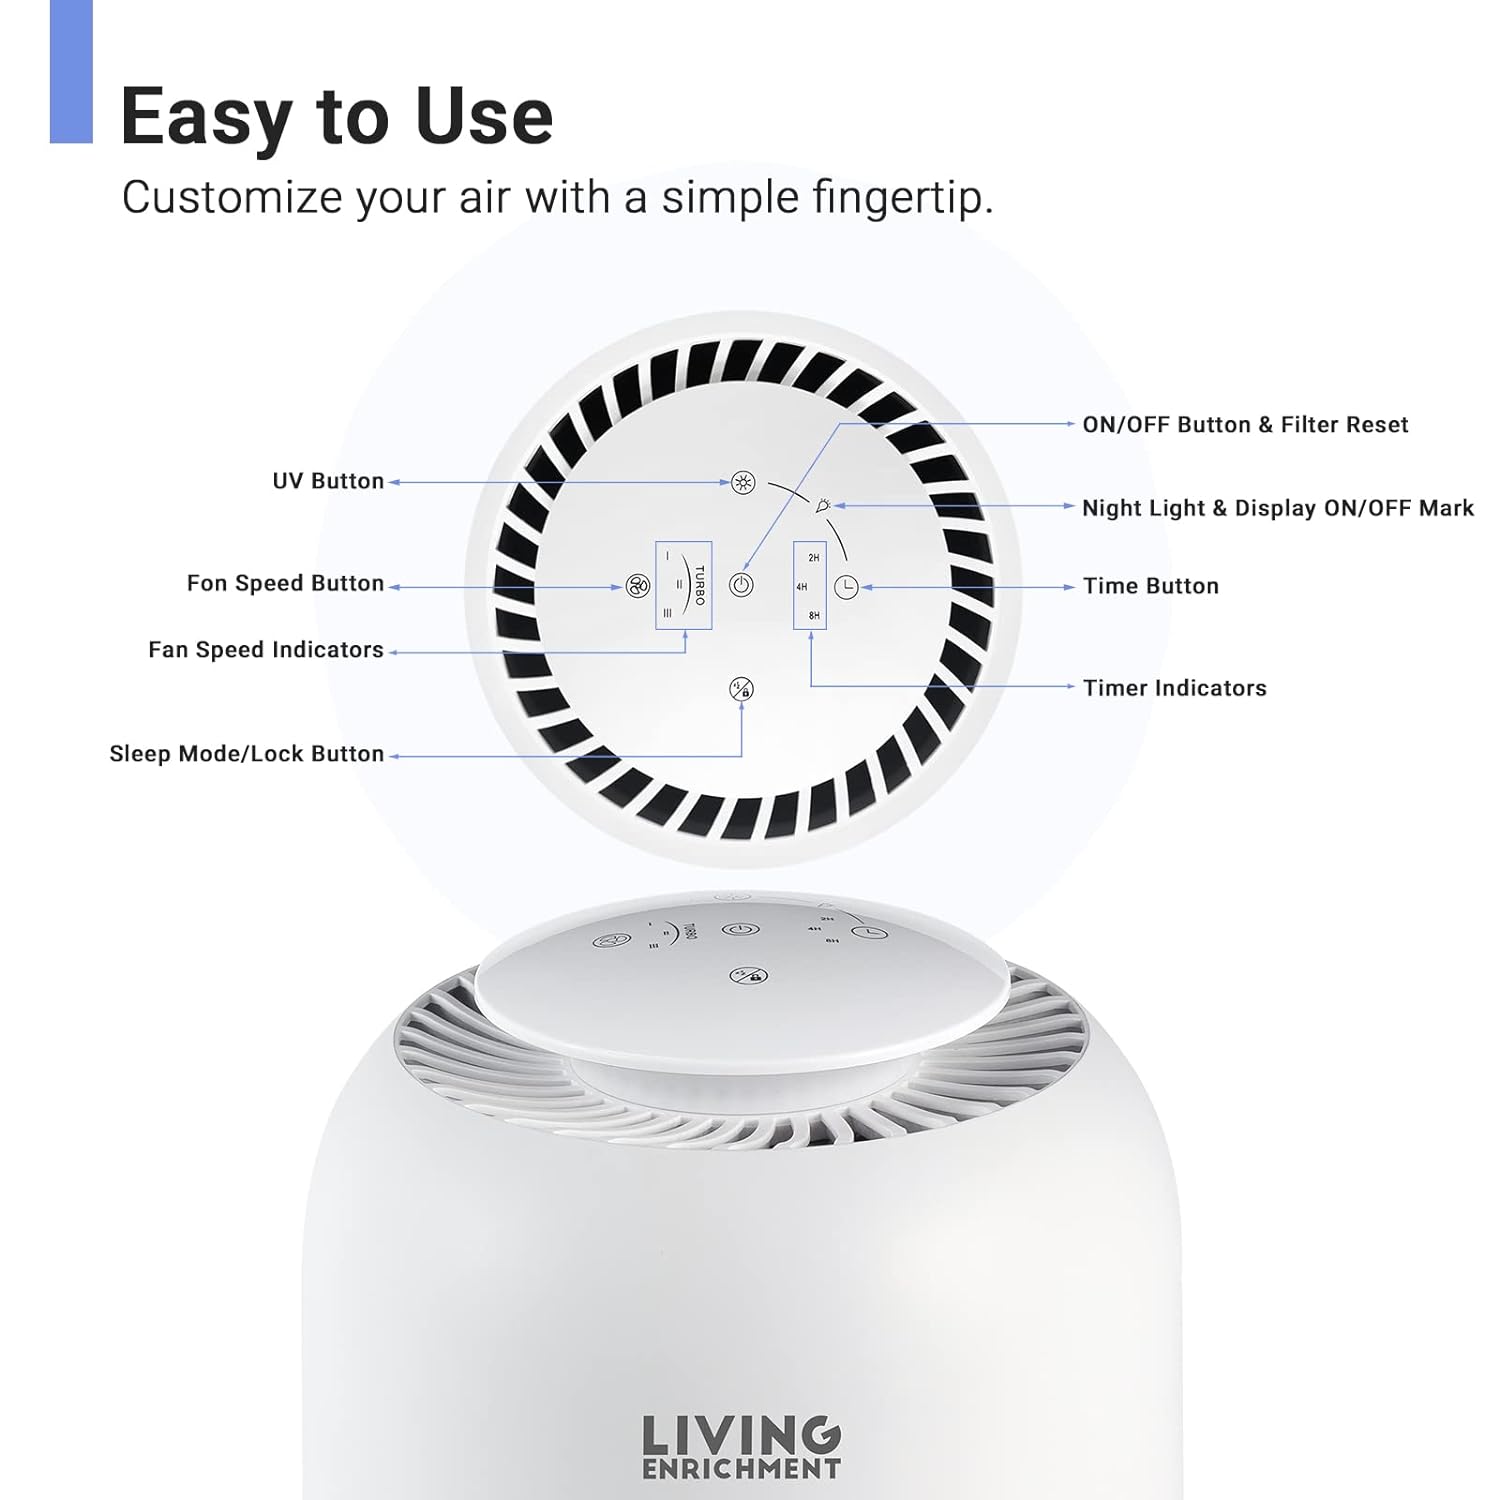 Living Enrichment Air Purifiers for Bedroom Home with True HEPA Filter, for Pet Hair Dander Allergies Odors Remover, Ozone-Free, Ultra Quiet, CARB/EPA Certified